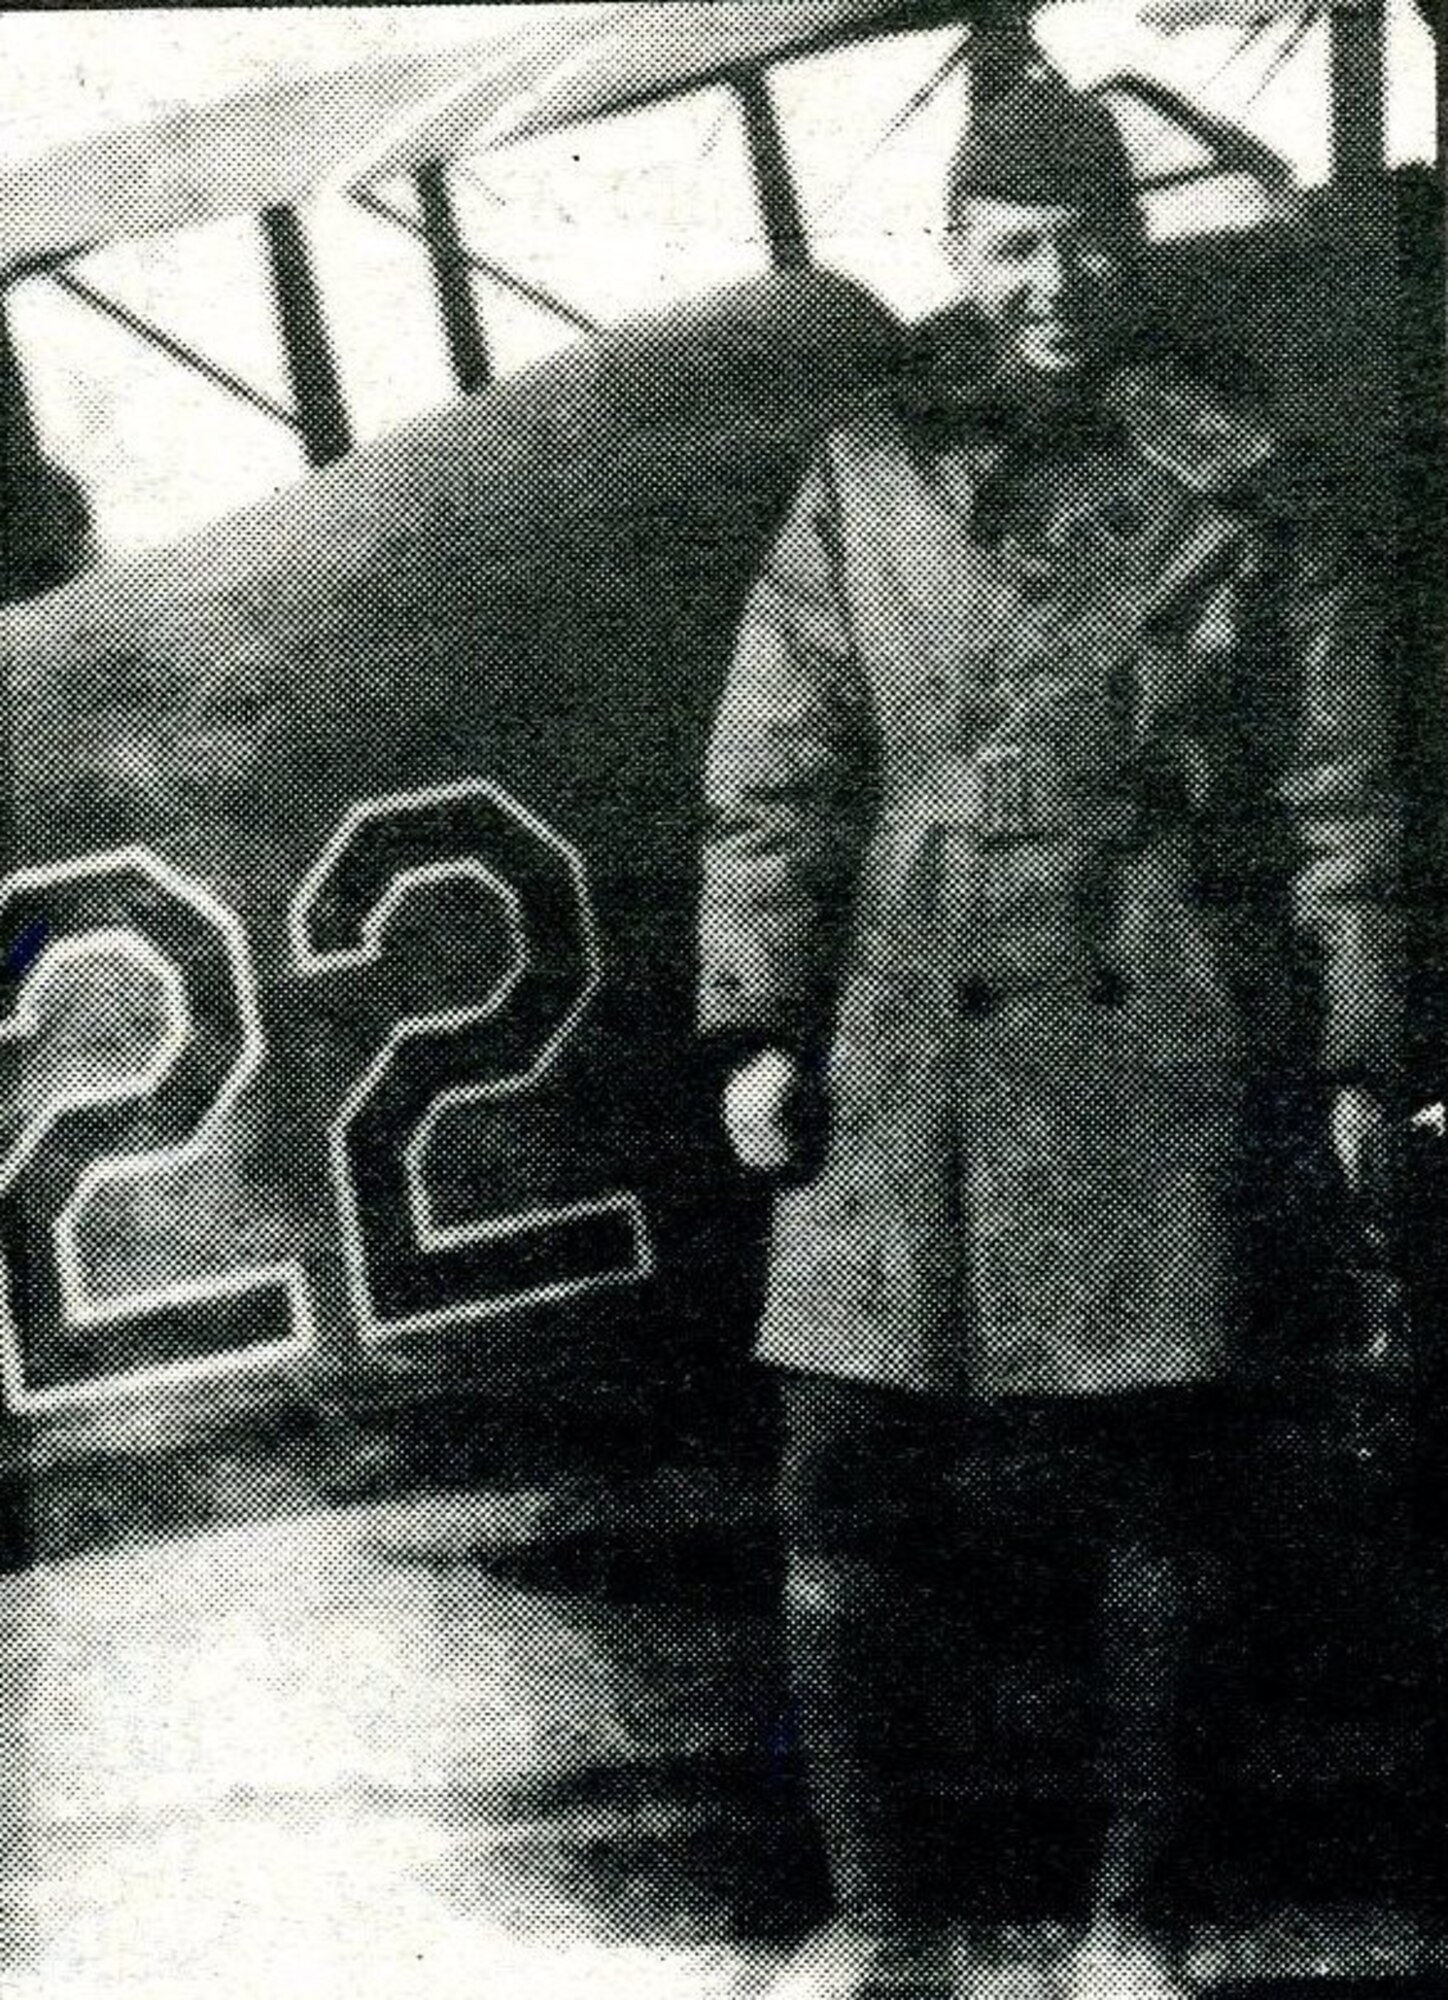 Lt. Frank Tyndall stands in front of a Spad XIII aircraft in France in 1918.  (Courtesy photo)